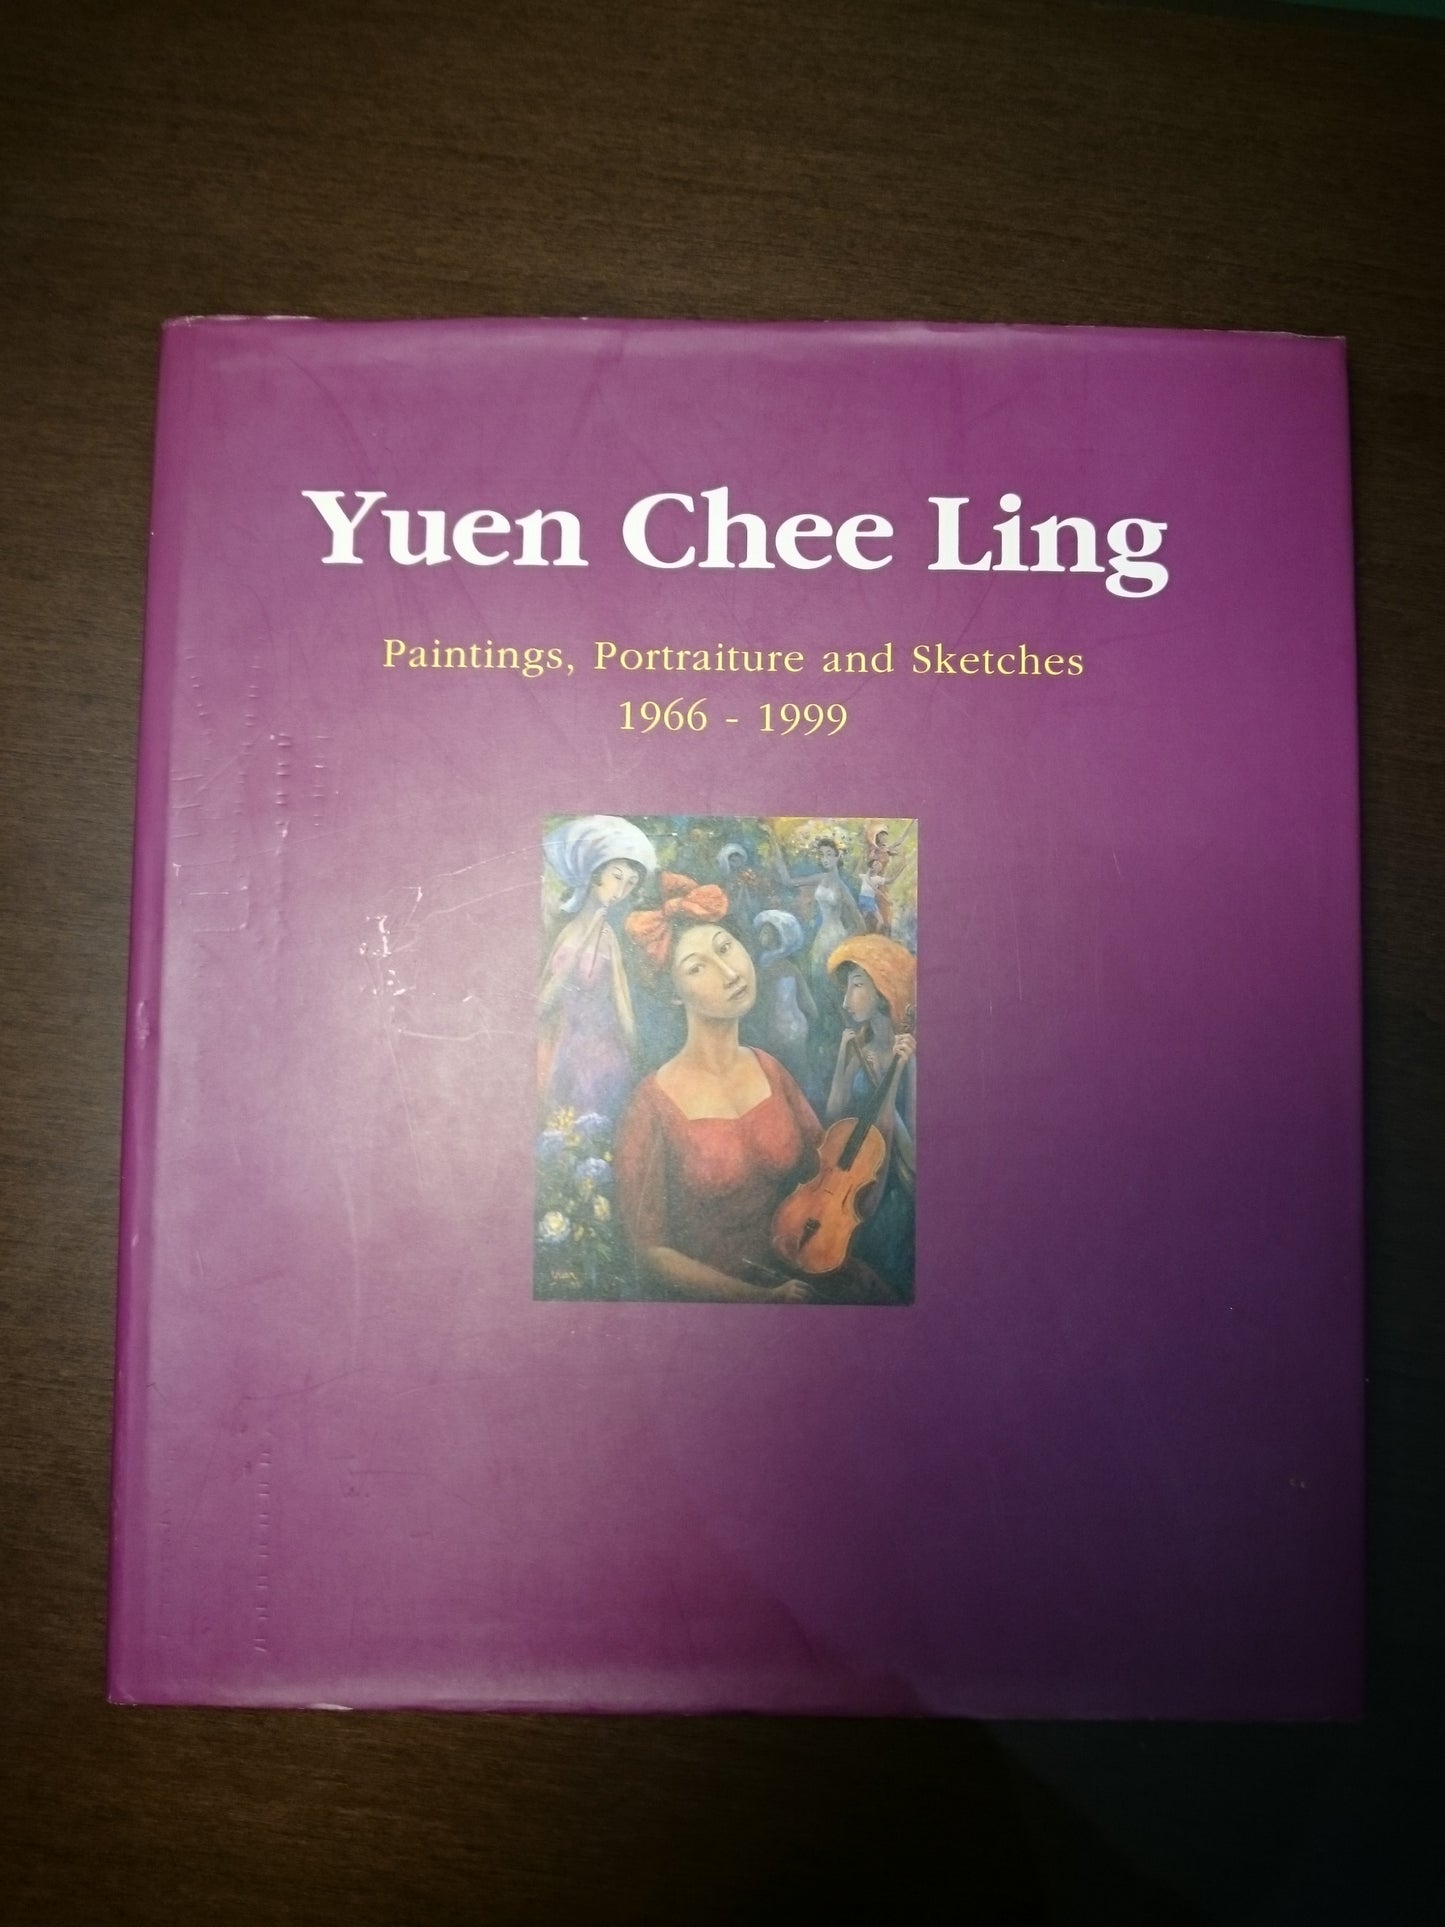 Yuen Chee Ling painting, portraiture and sketches 1966-1999